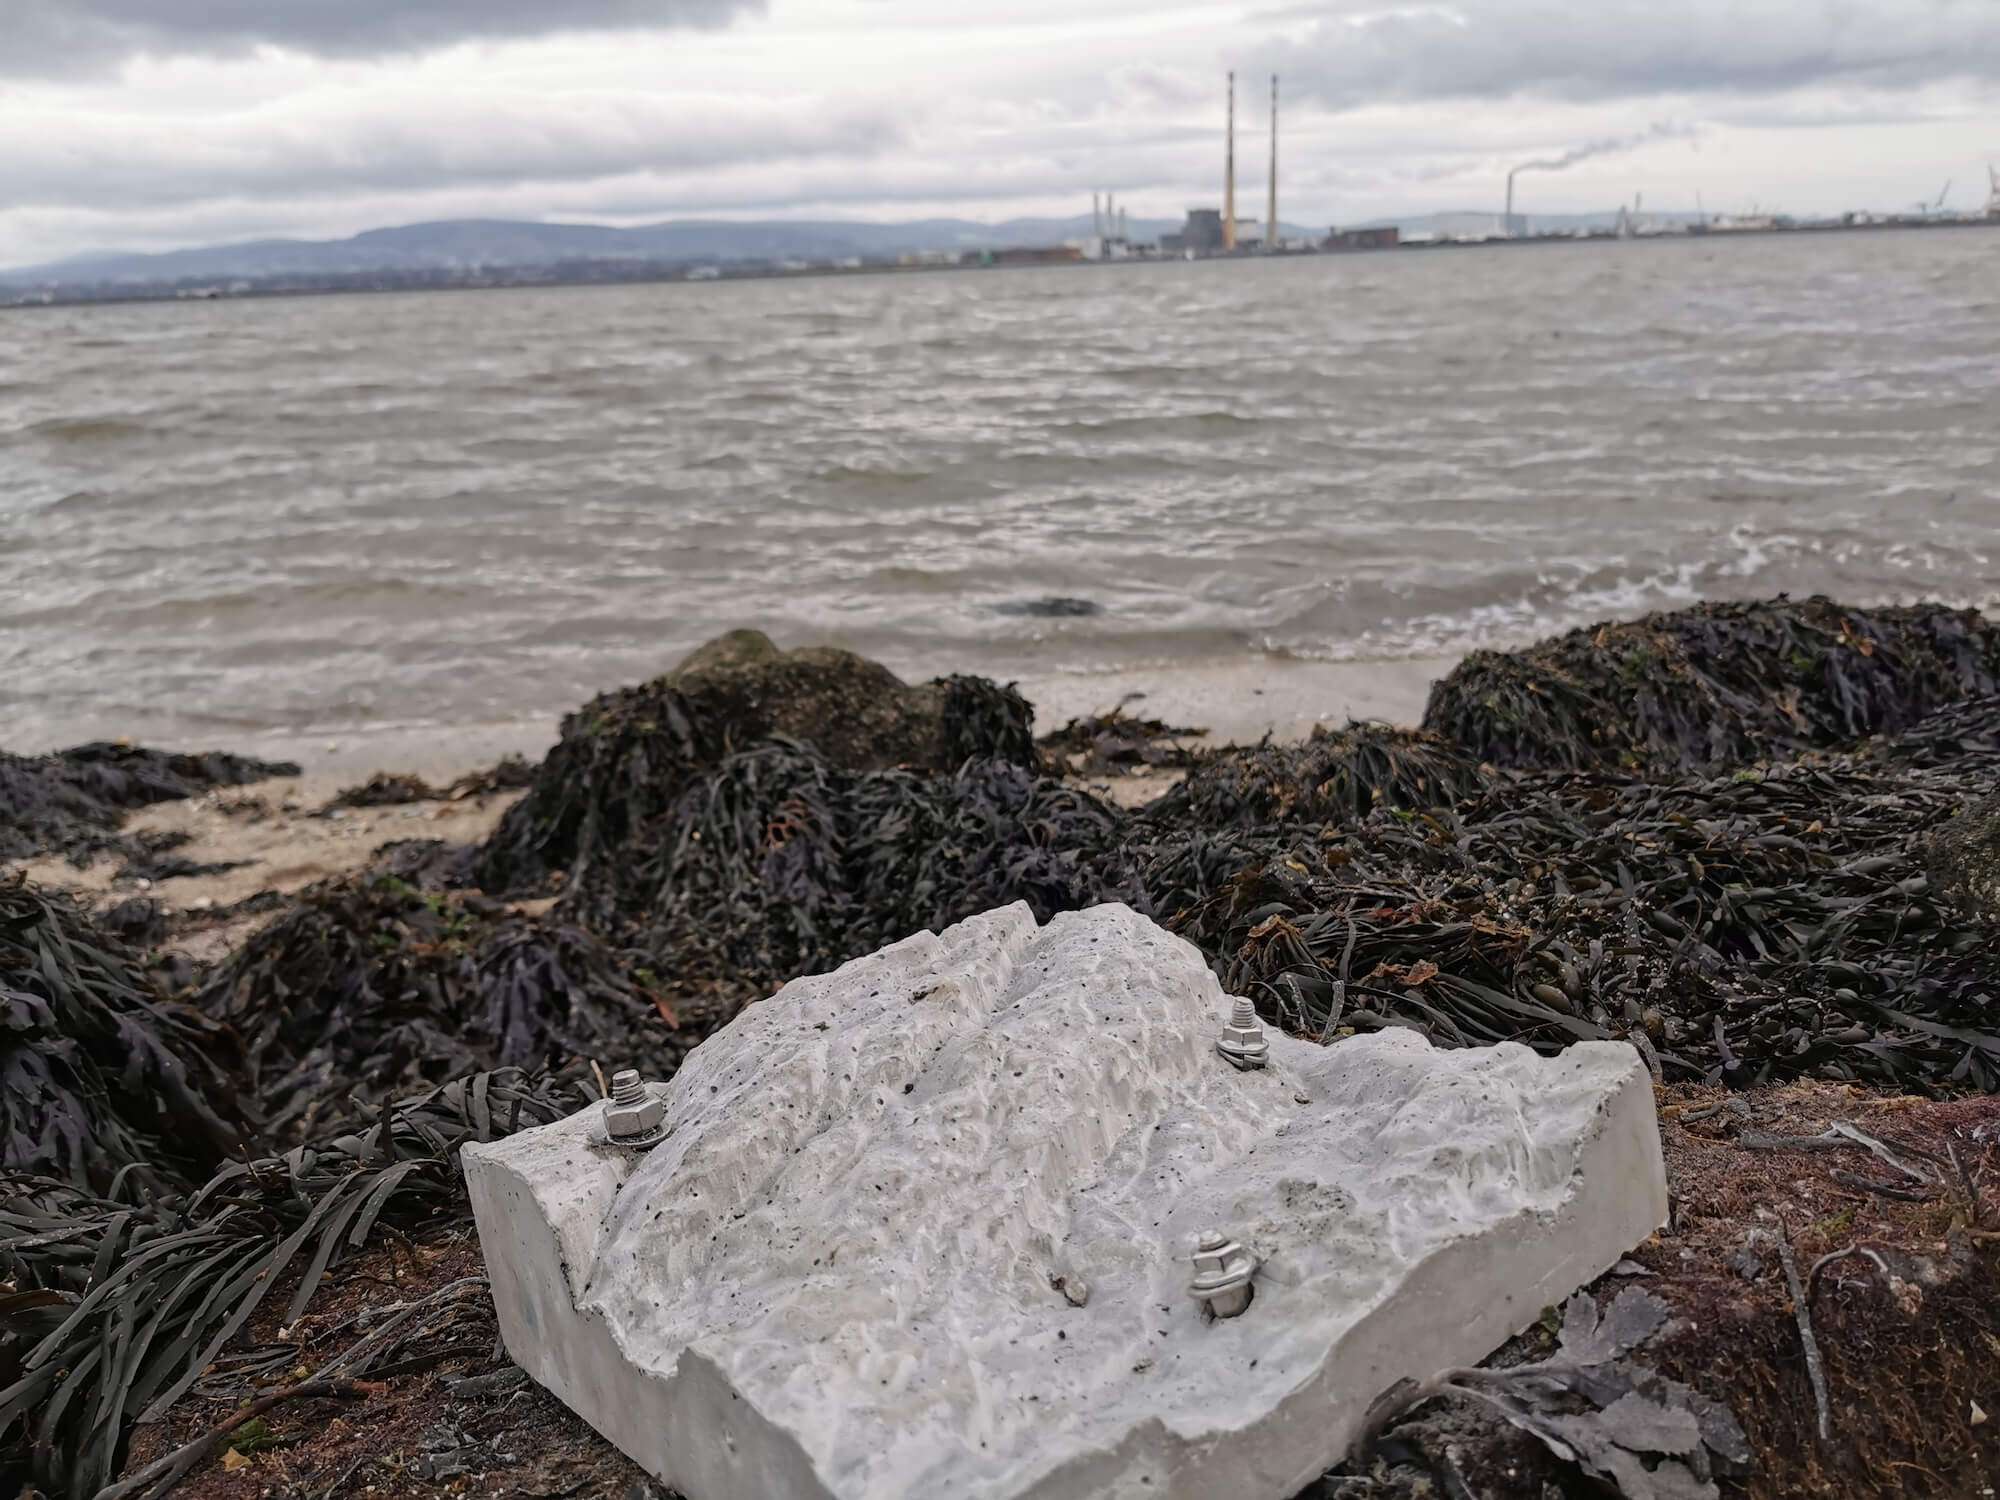 An experimental eco-engineered tile designed by Ecostructure researchers is deployed on the Dublin coast for experiments.